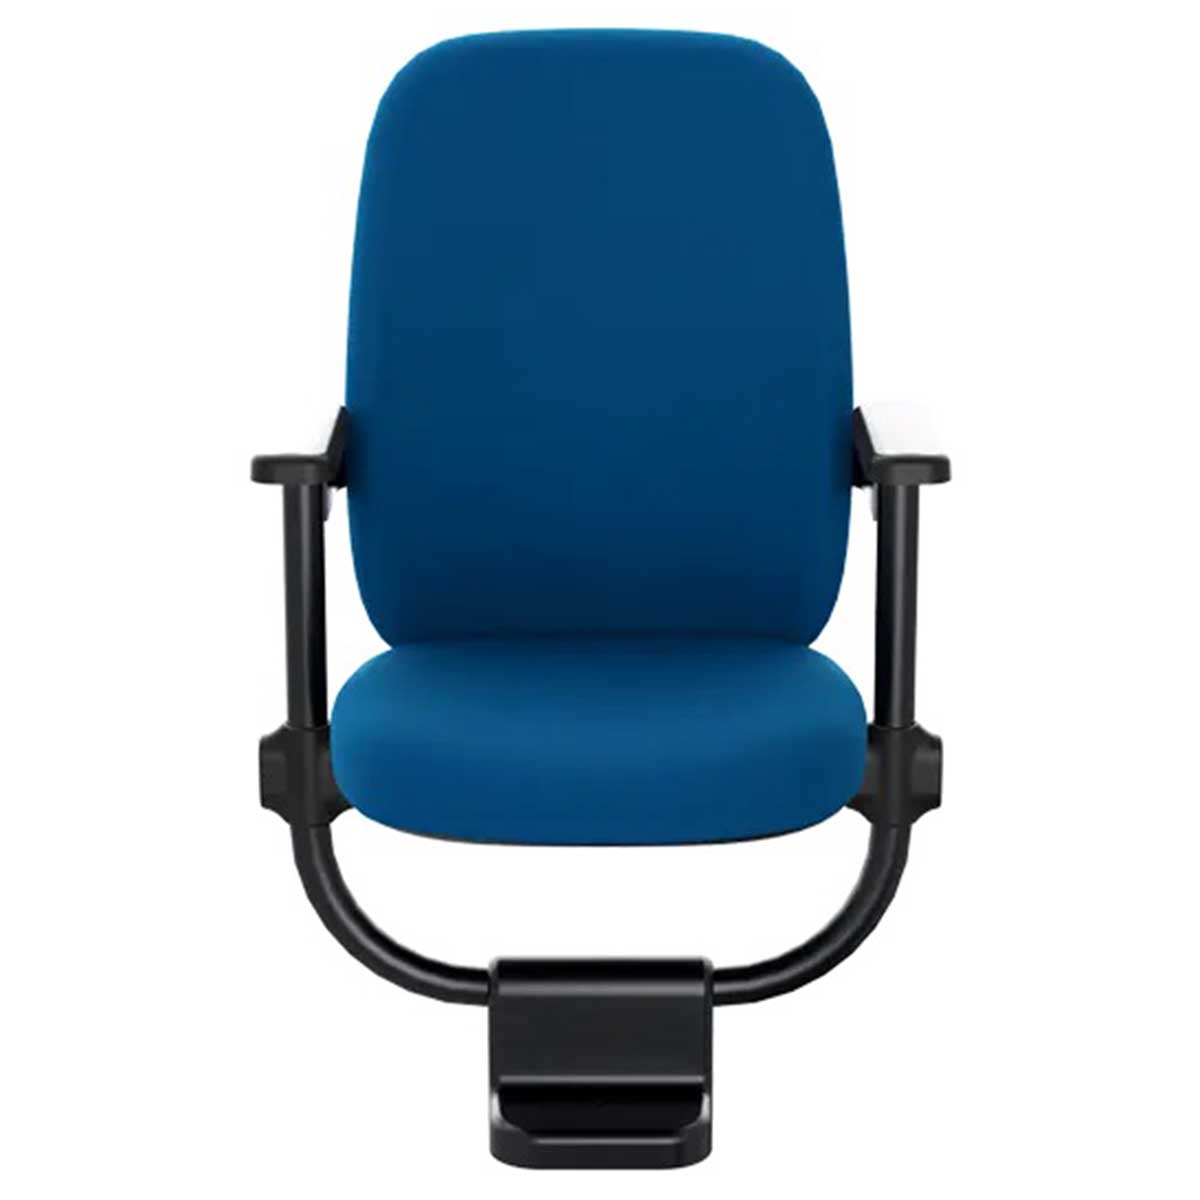 Push Back Chair Manufacturers, Suppliers, Exporters in Delhi 